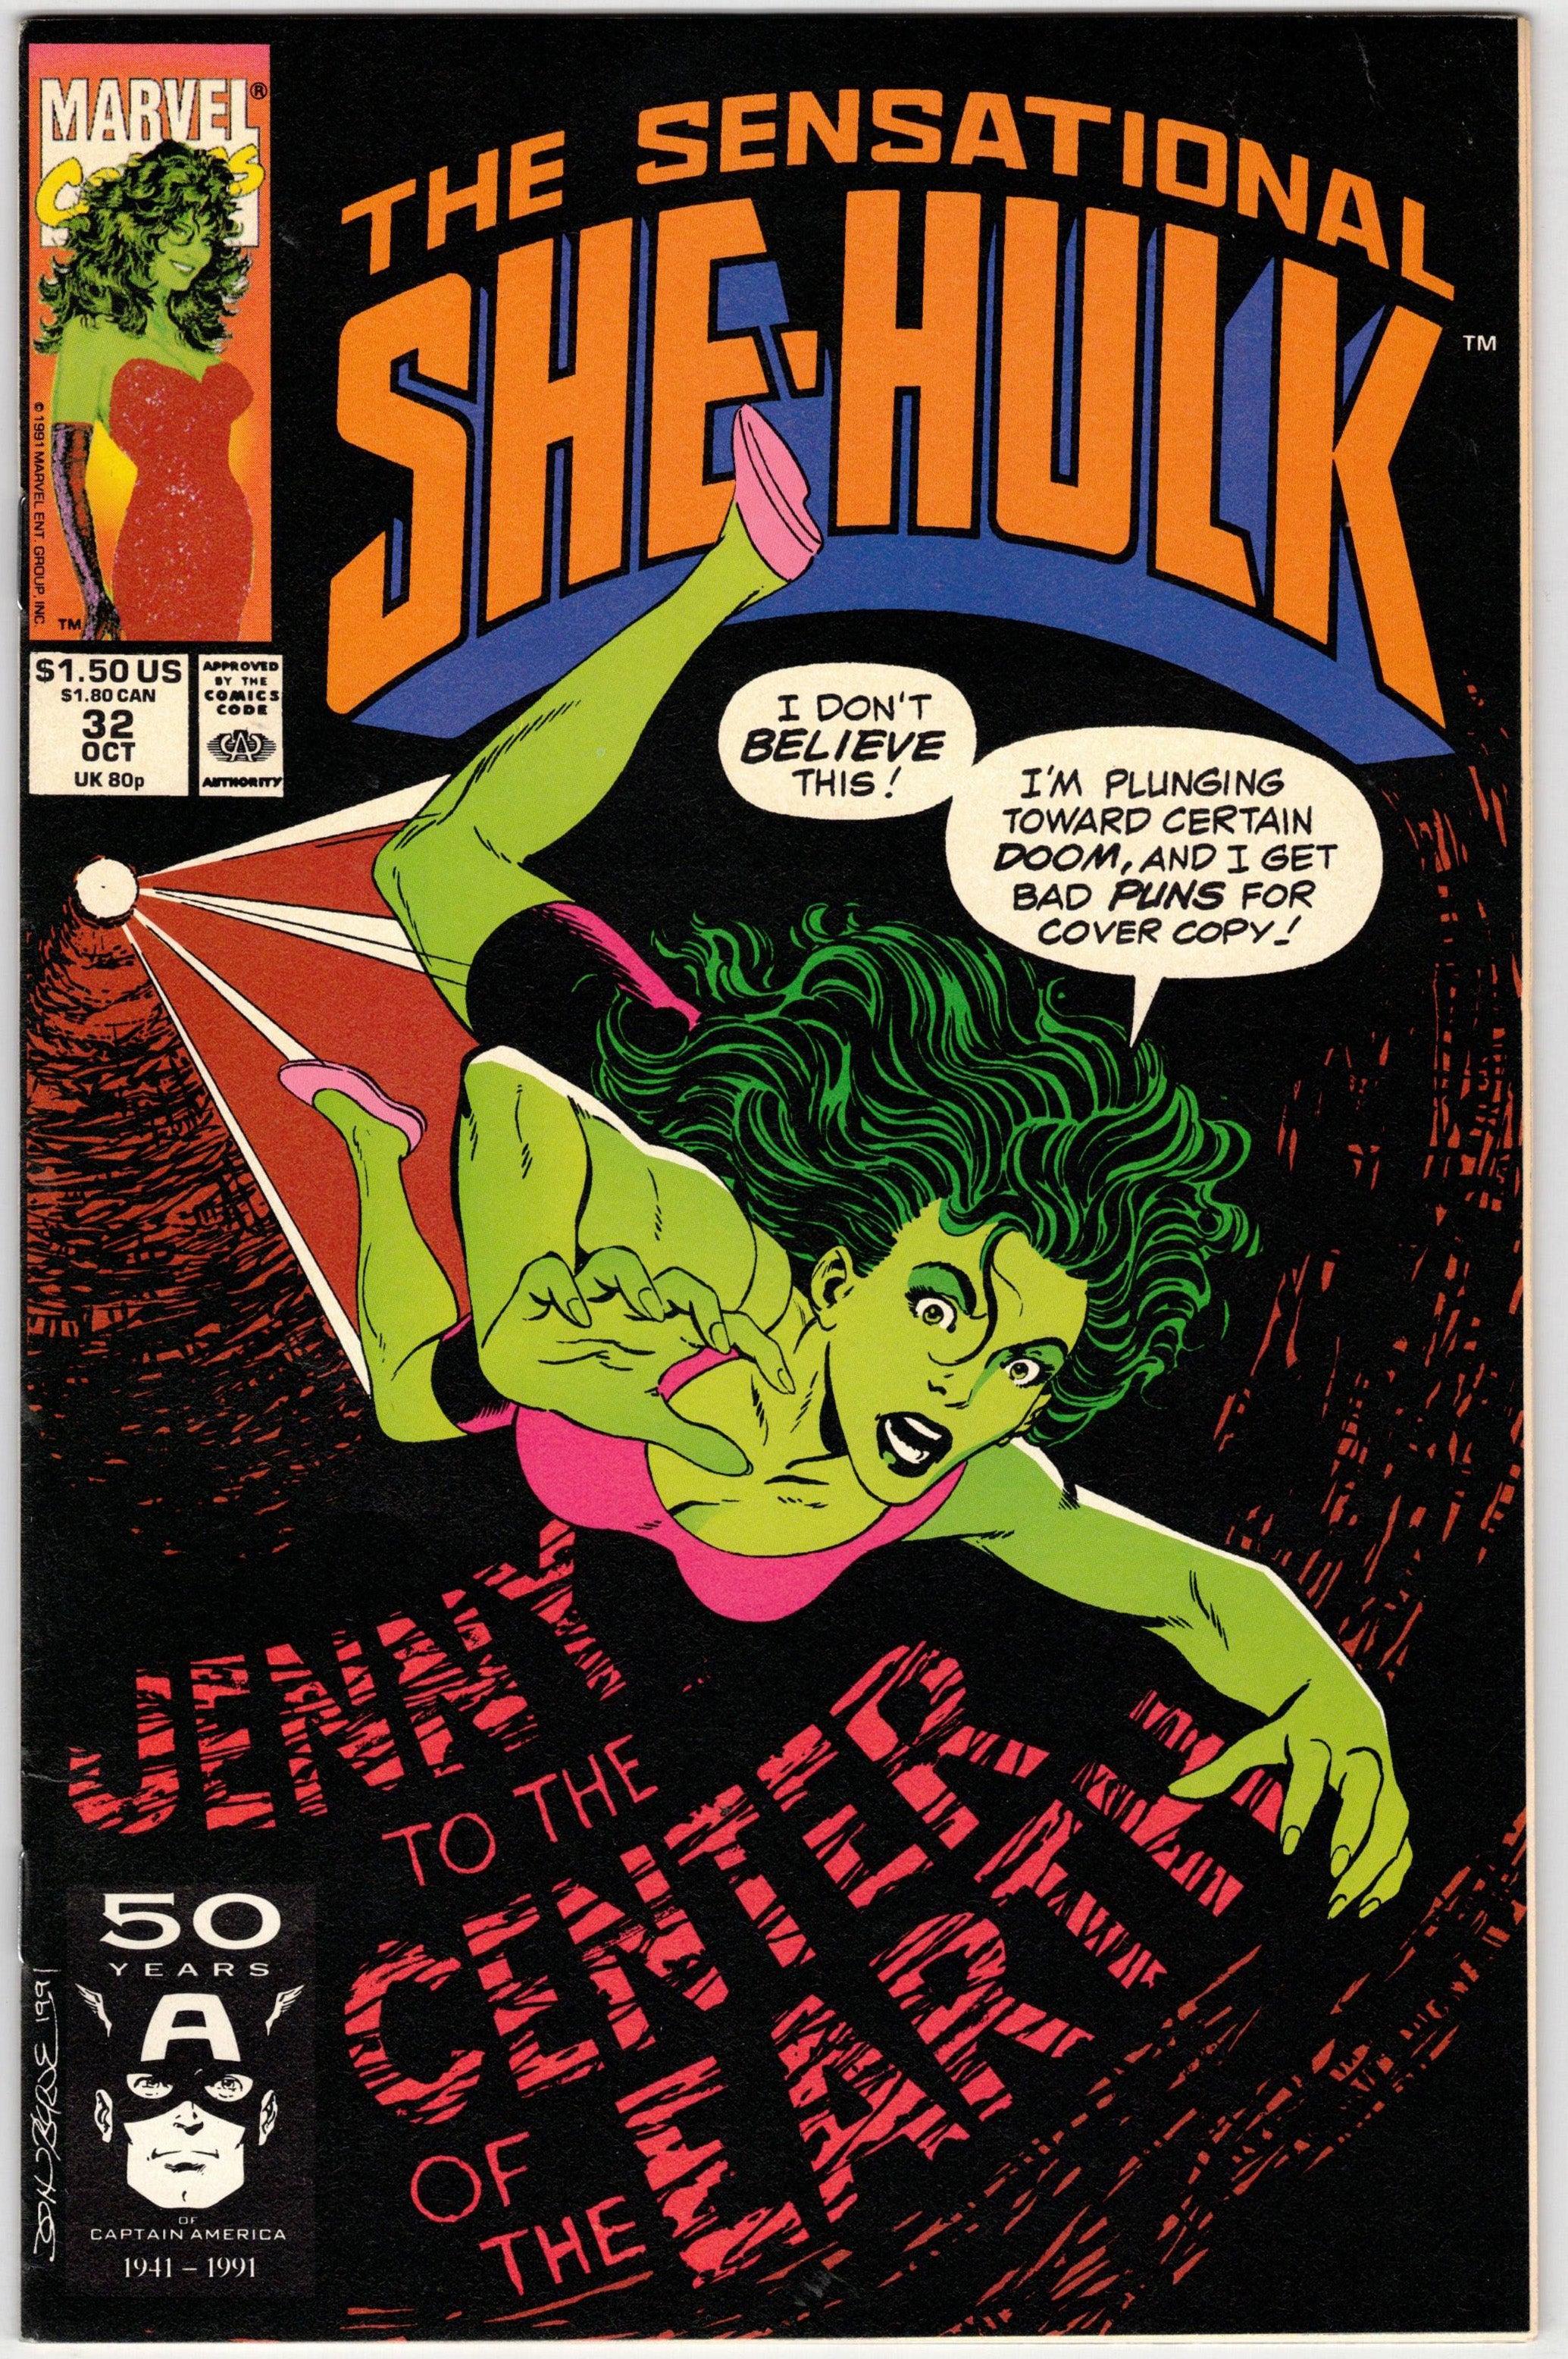 Photo of Sensational She-Hulk (1991) Issue 32 - Very Fine + Comic sold by Stronghold Collectibles